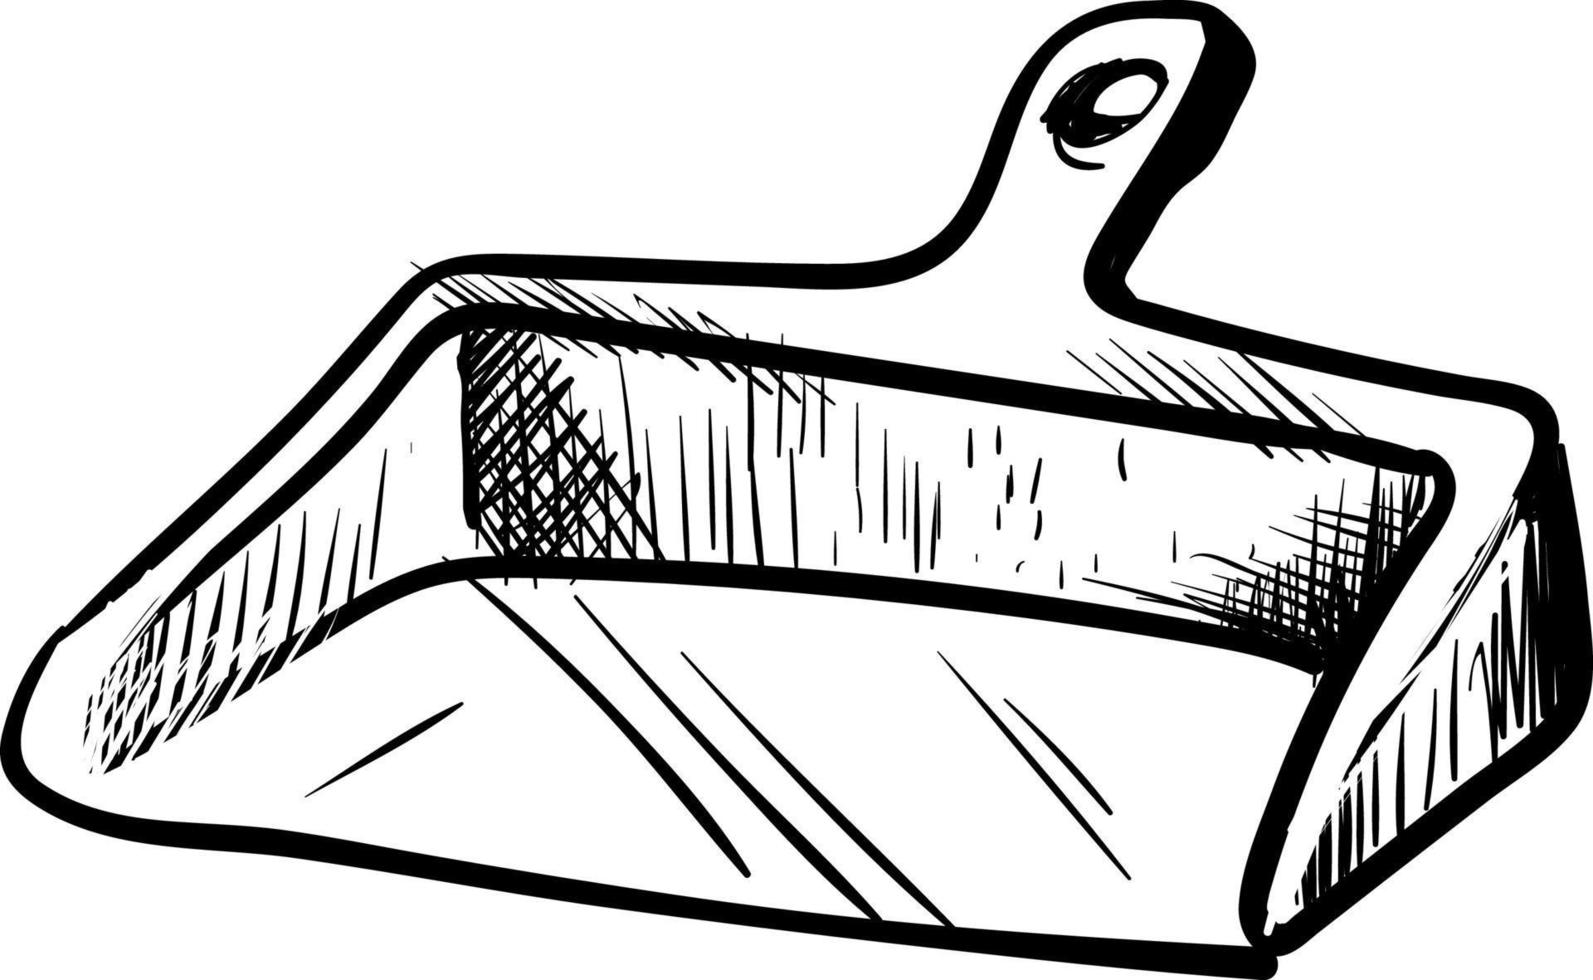 Dustpan drawing, illustration, vector on white background